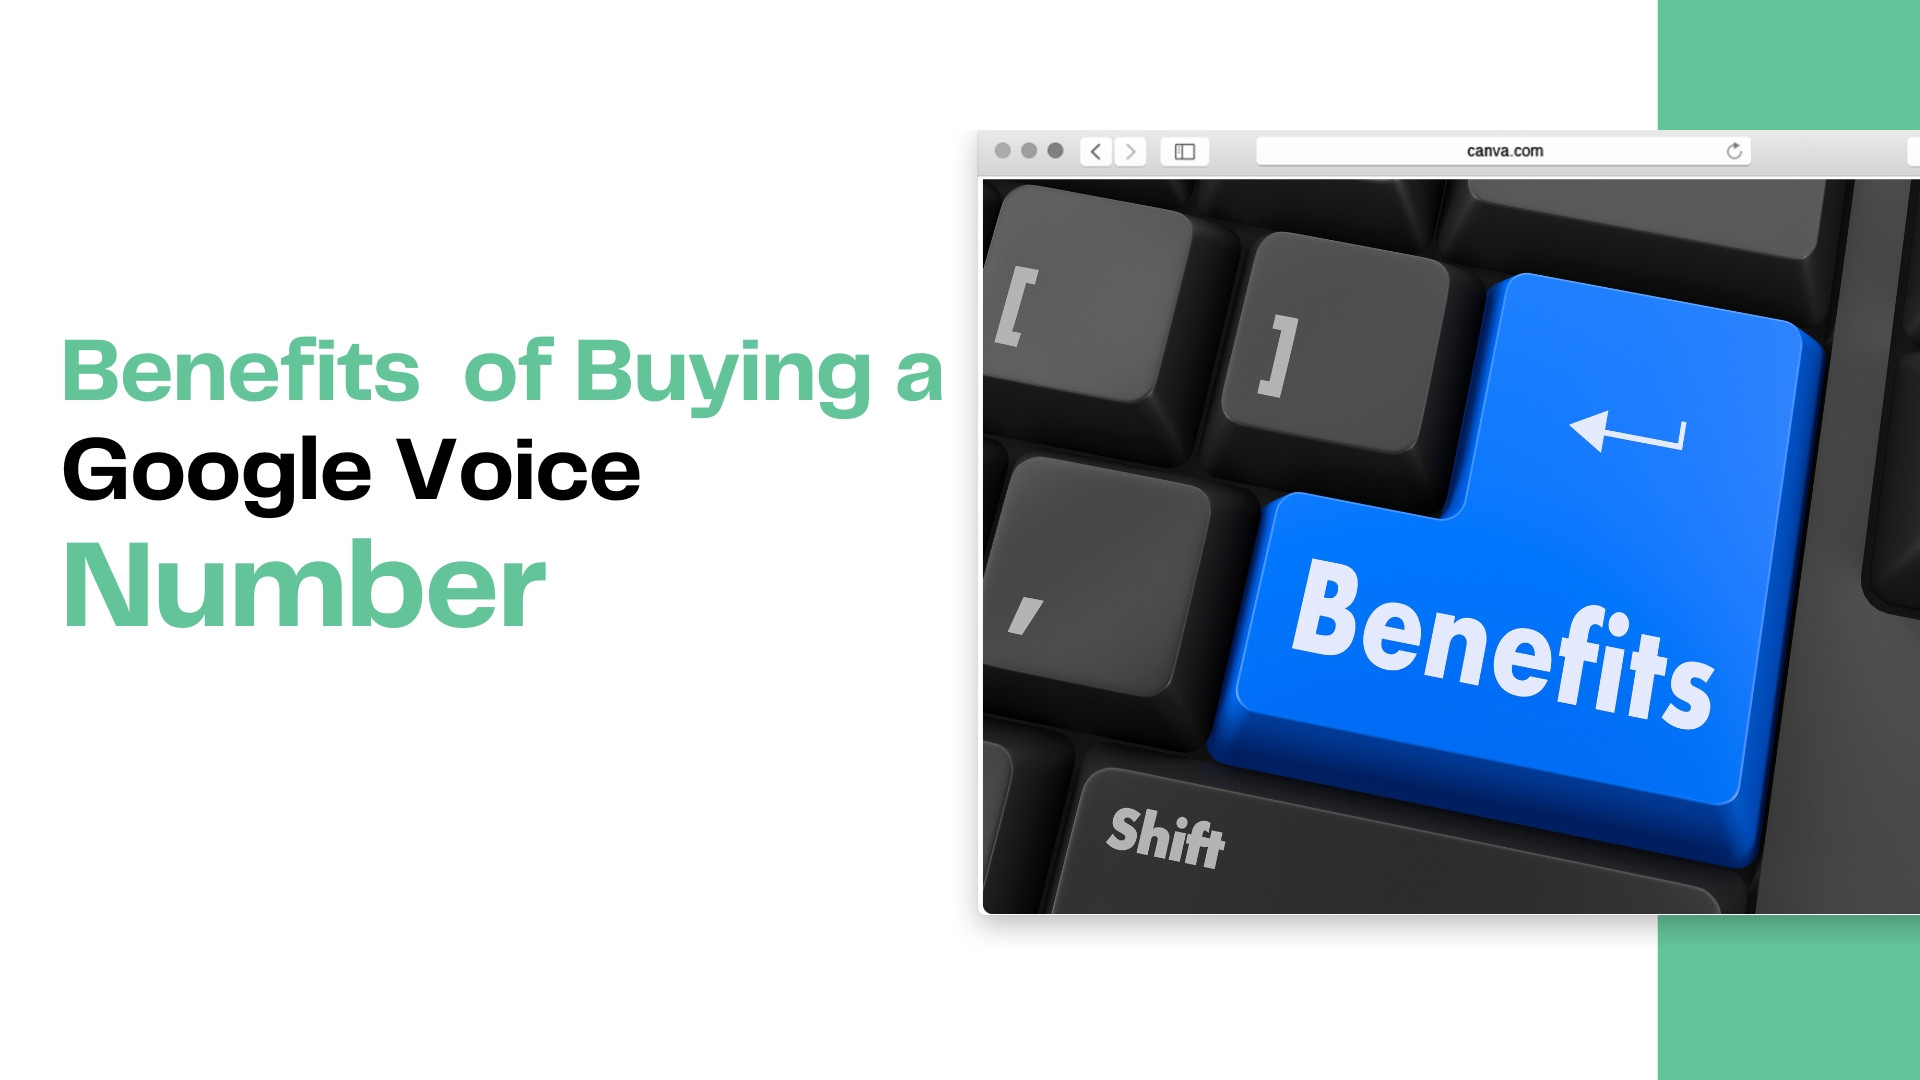 Benefits of Buying a Google Voice Number